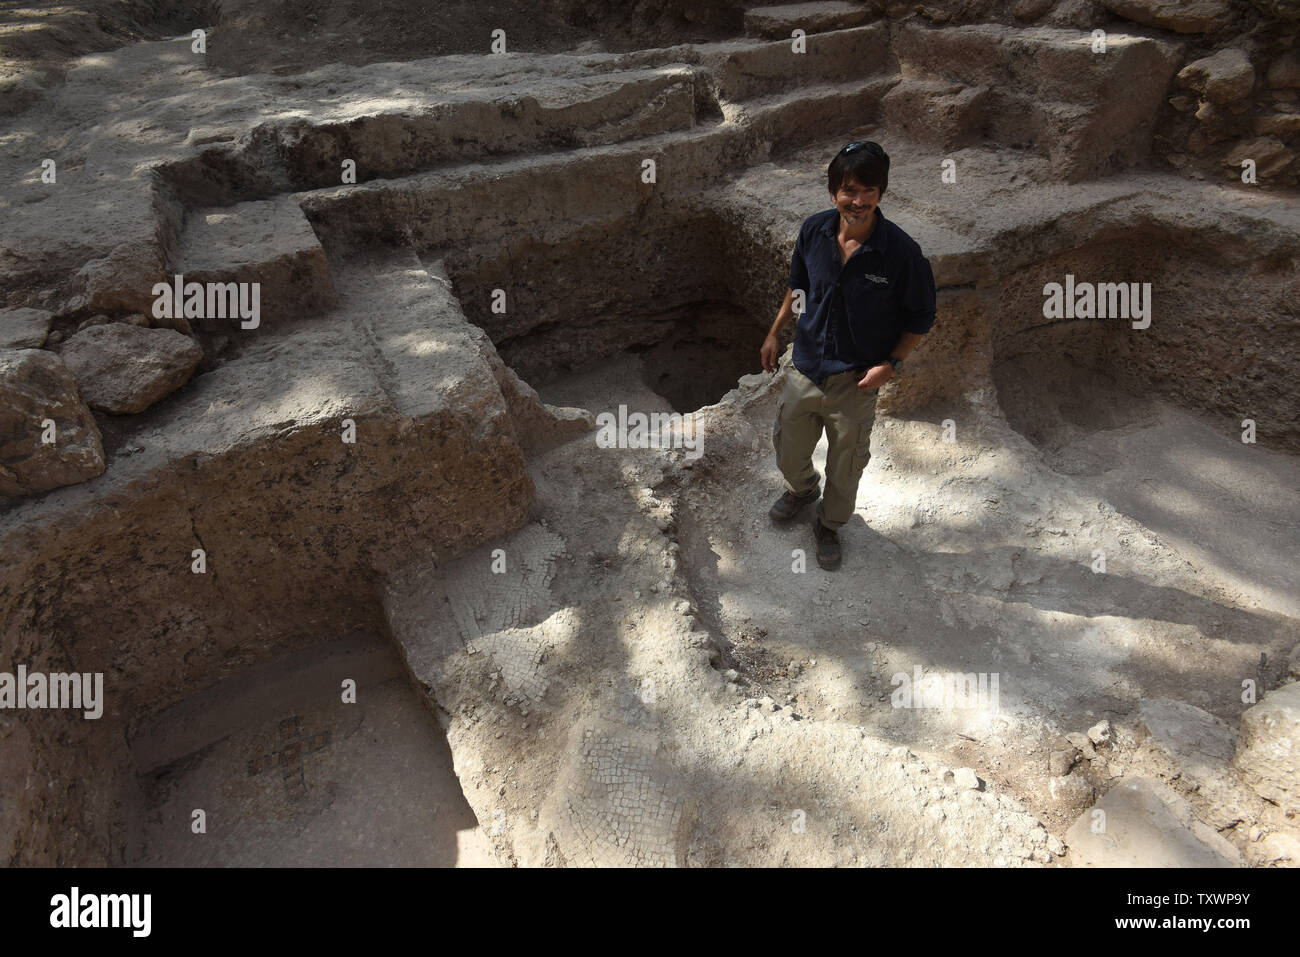 Archeologist Amit Reem shows an archeological site that has revealed a large mausoleum uncovered by the Israel Antiquities Authority while searching for the real location of the Tomb of the Maccabees in Modi'in, Israel, September 21, 2015.  Byzantine Period mosaics adorned with a cross were found in the floor of a burial vault believed to be associated with the Tombs of the Maccabees who were exalted saints in the eyes of early Christianity. The Maccabees led the uprising against Greek rule and were responsible for cleansing the impurity from the Second Temple. As yet, archaeological evidence Stock Photo